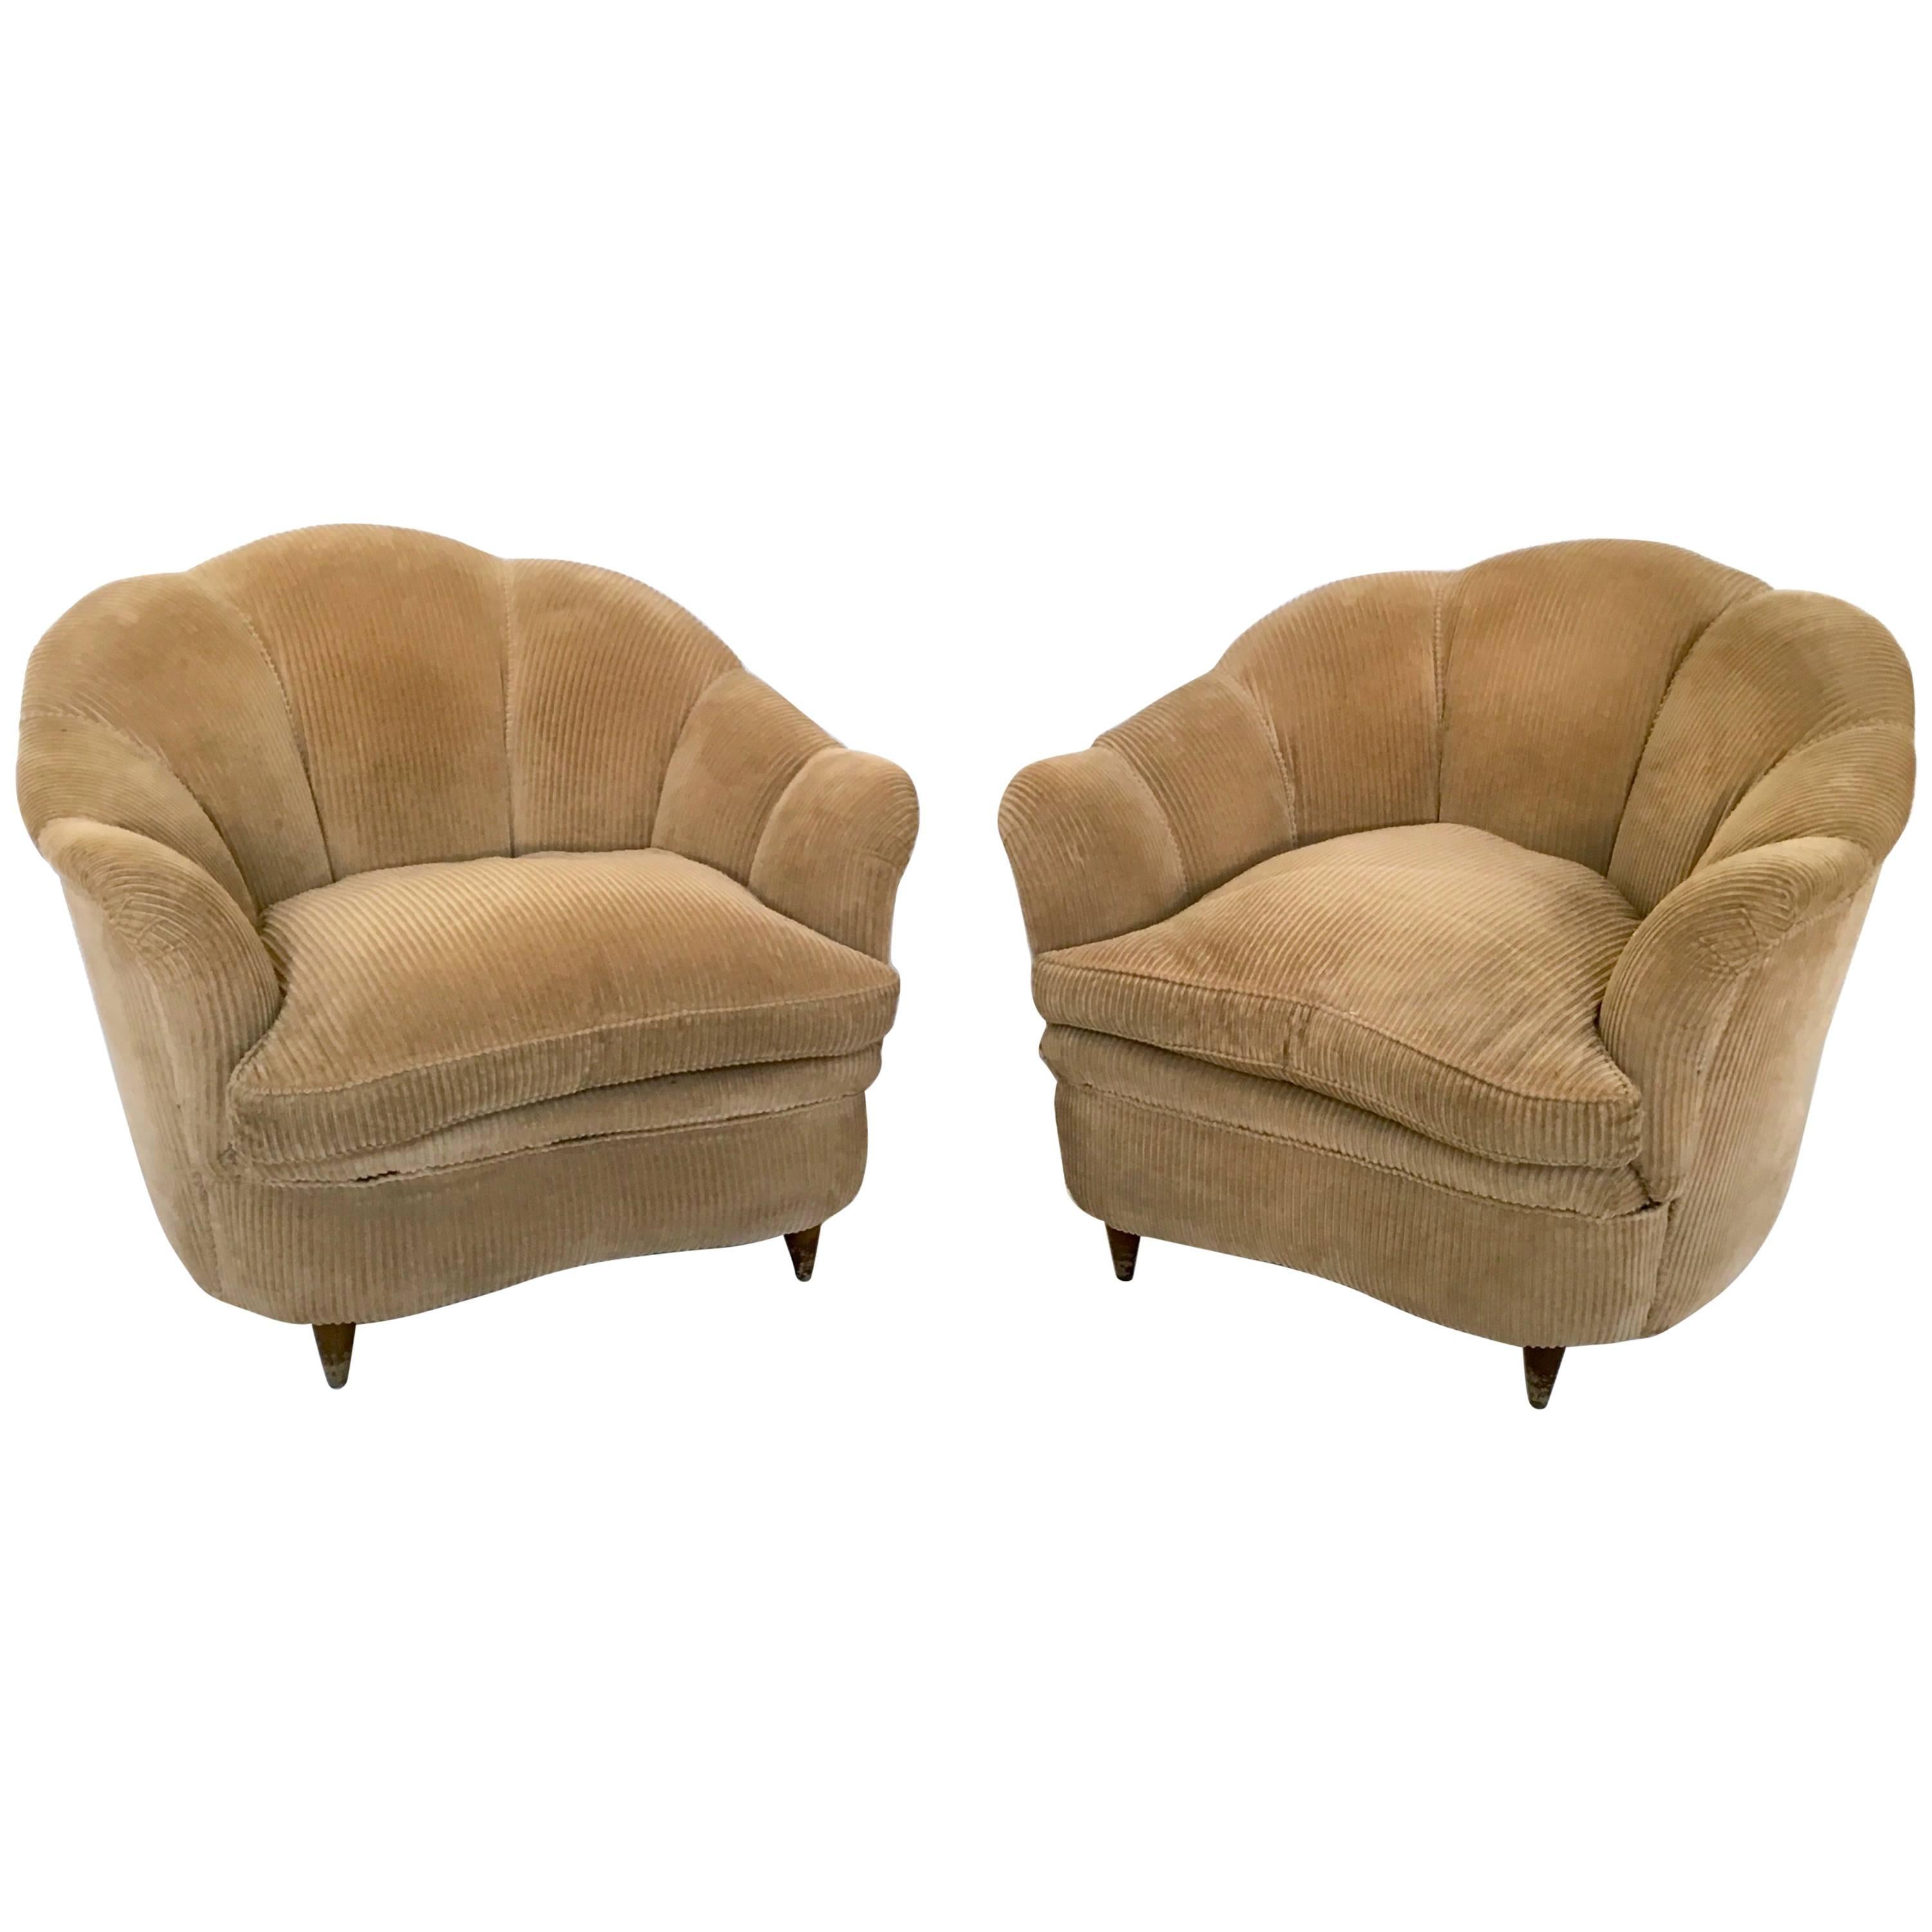 Pair of Italian Velvet Armchairs Attributed to Guglielmo Ulrich, 1940s-1950s